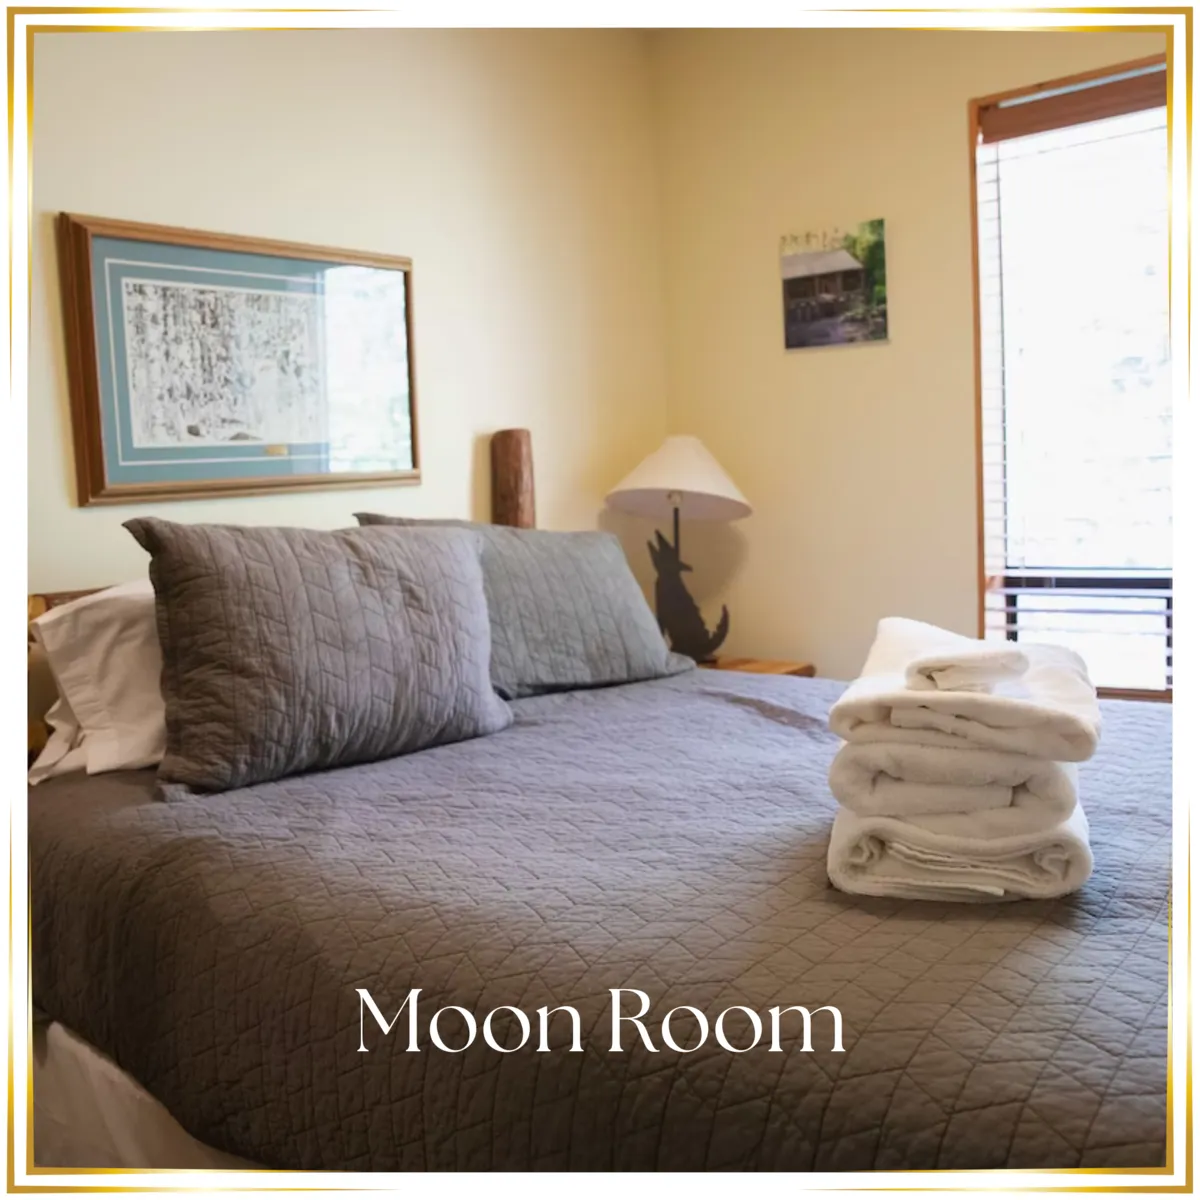 Moon Room - Shared Room (Sold Out)